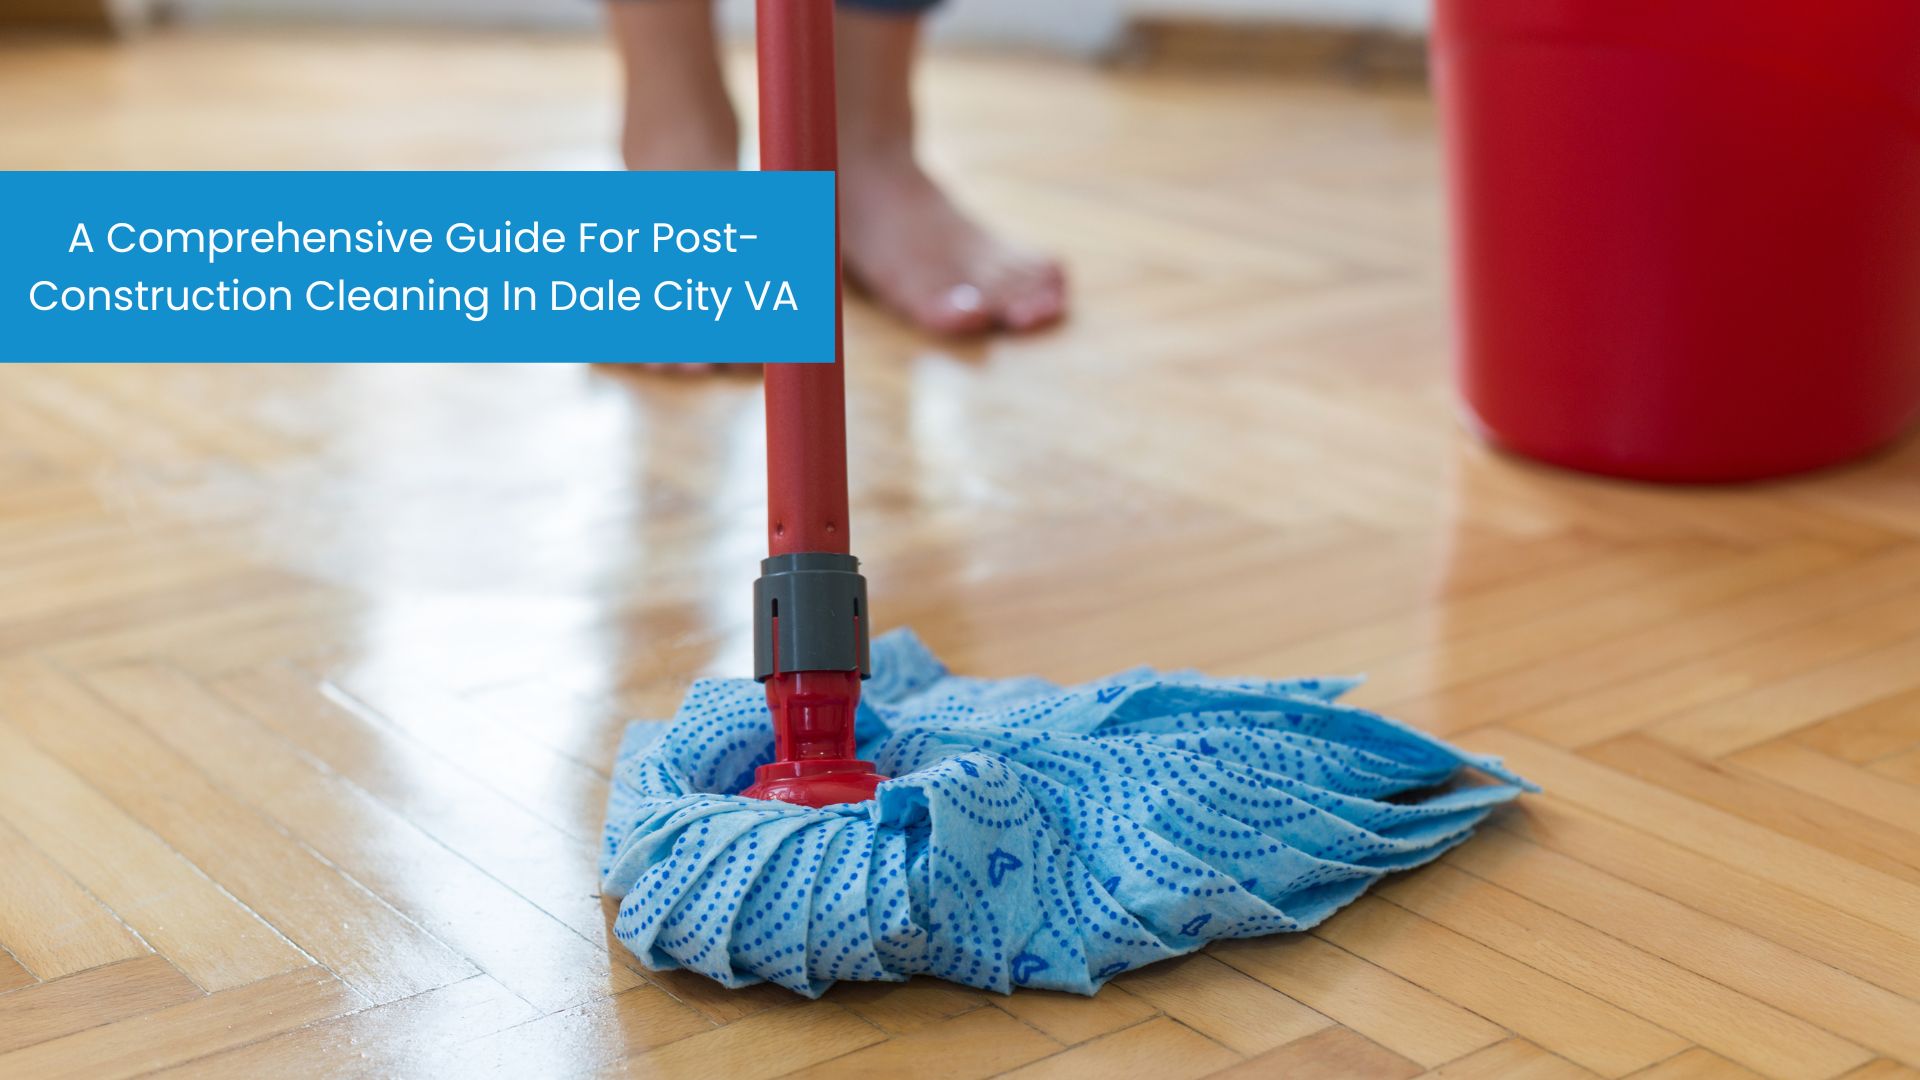 A Comprehensive Guide For Post-Construction Cleaning In Dale City VA